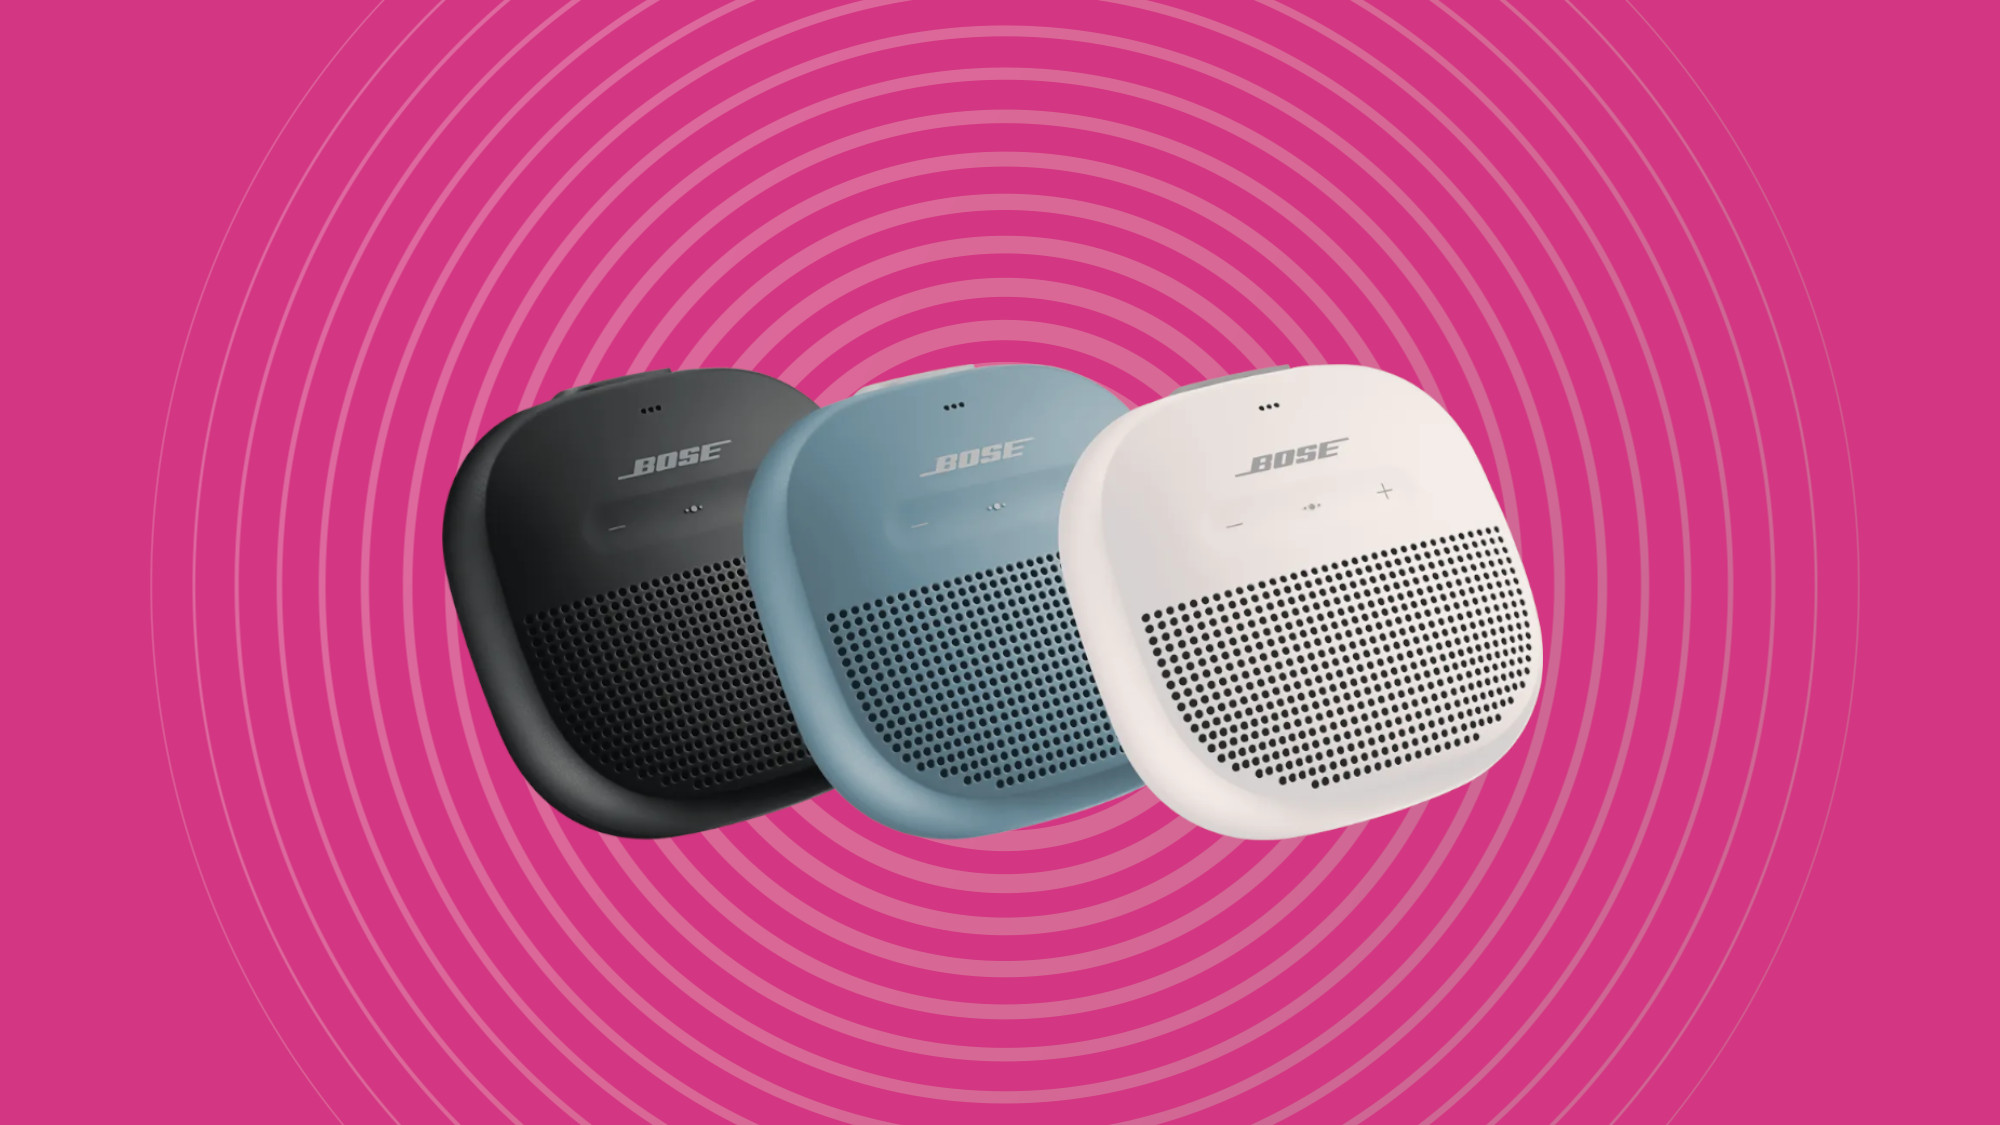 Bose speaker bluetooth • Compare & see prices now »